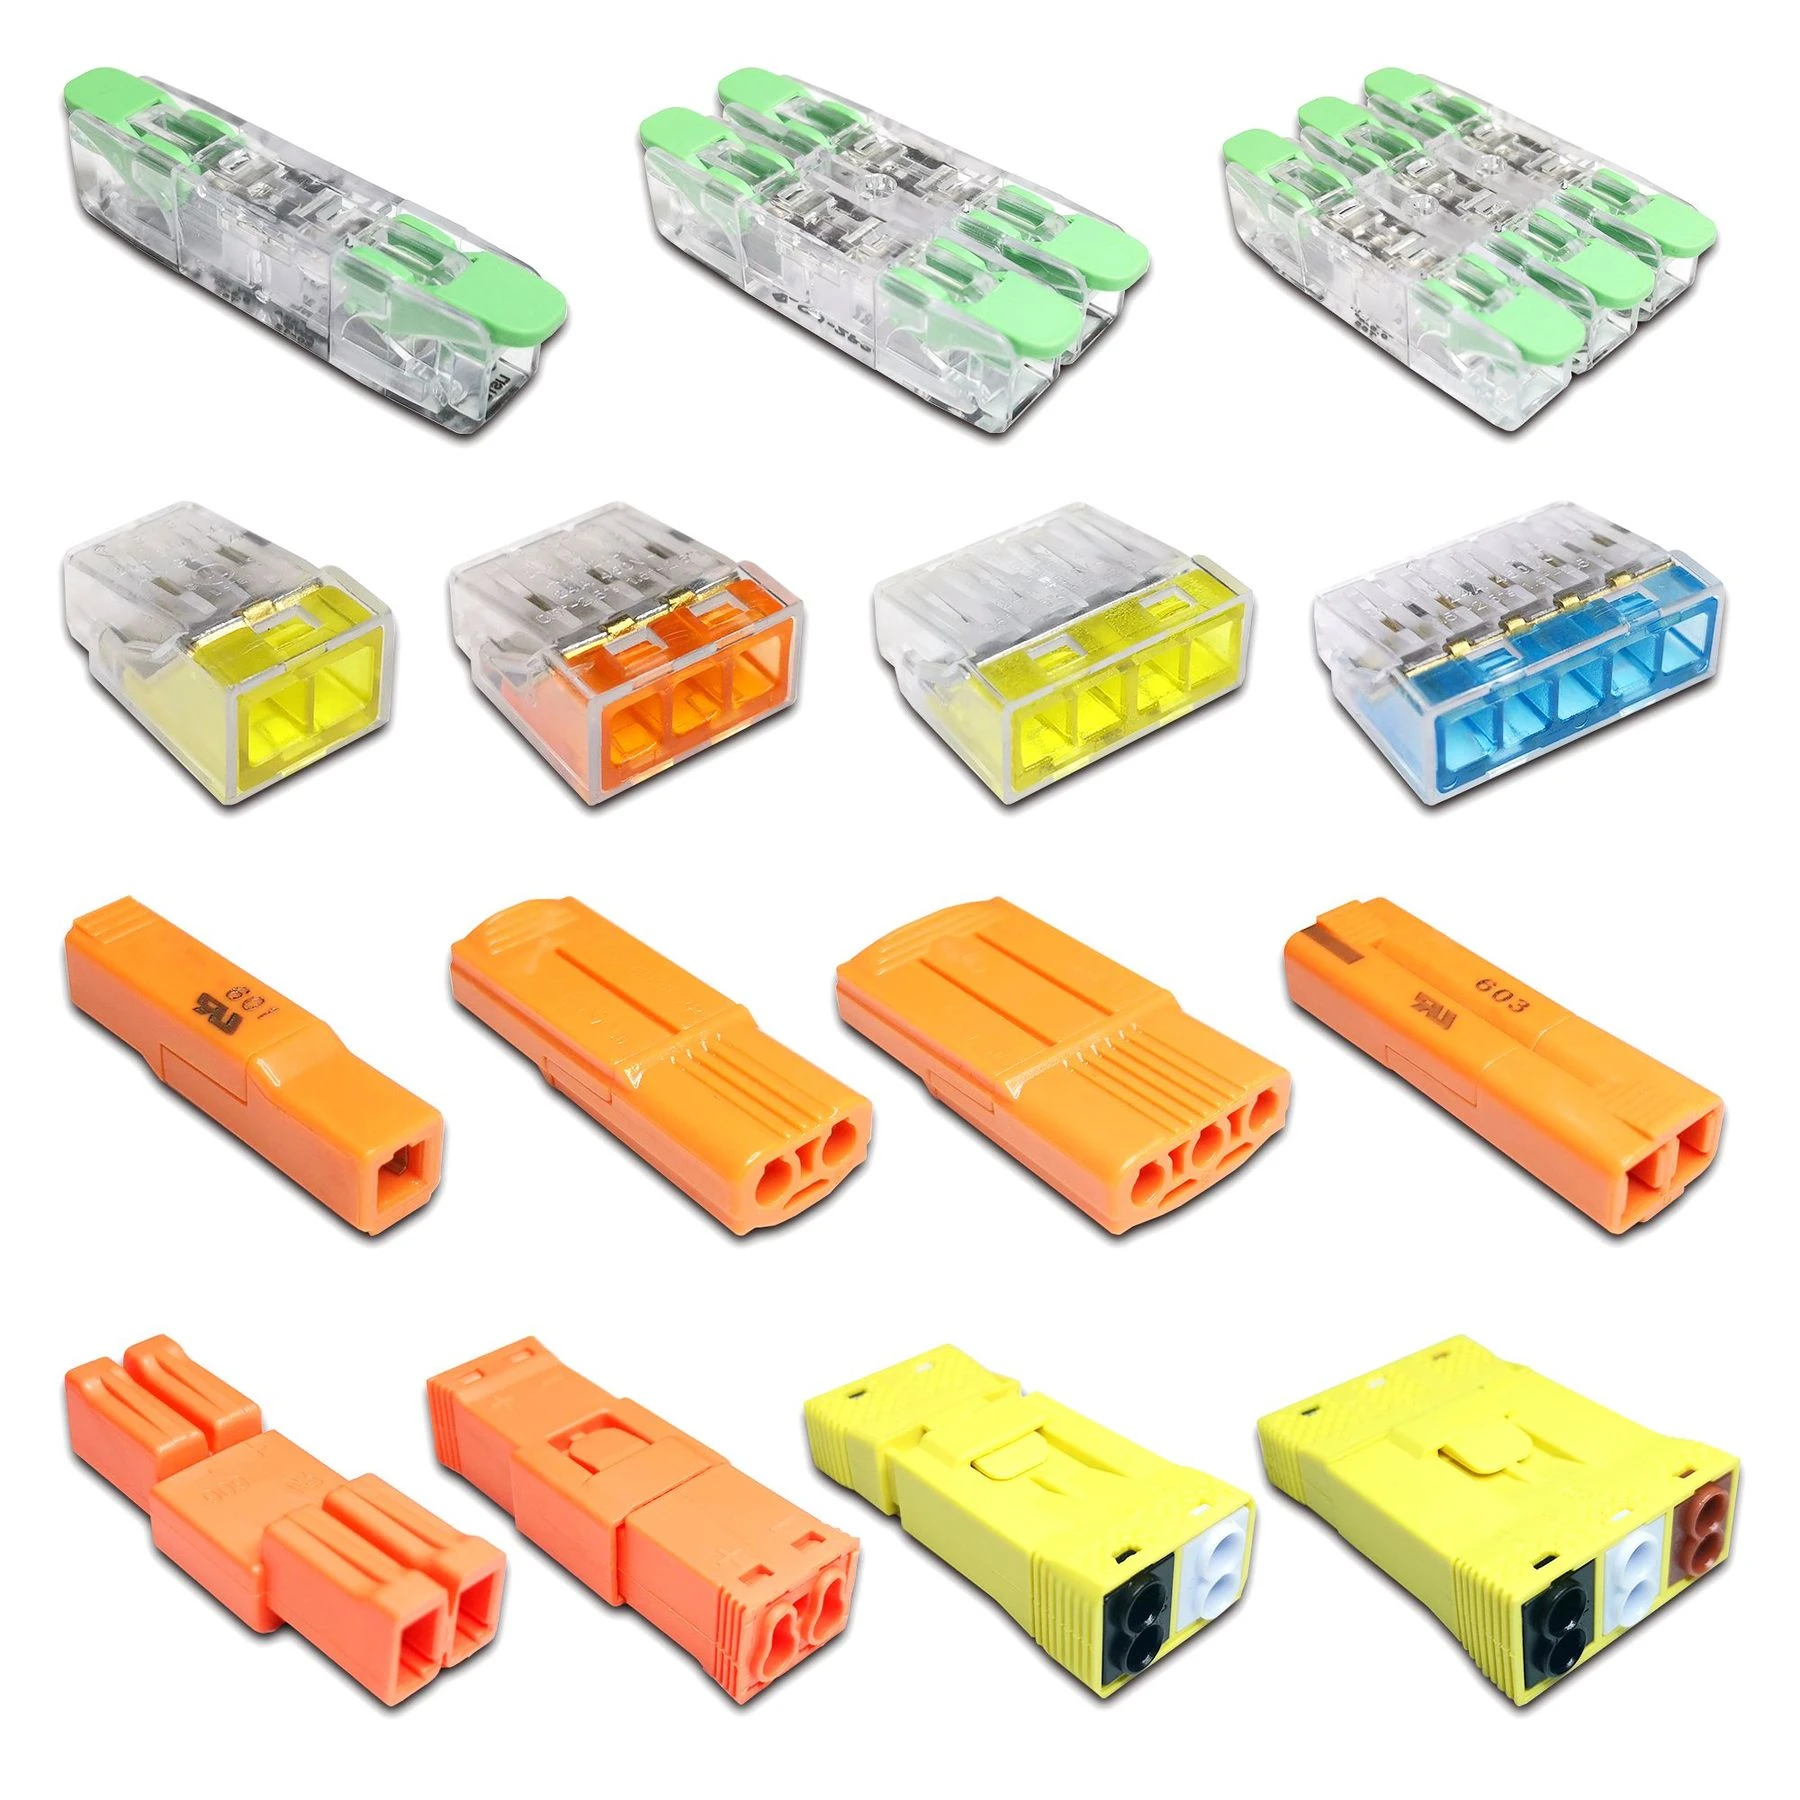 Mini Fast Wire Cable Connectors Universal Compact Conductor Spring Splicing Wiring Connector Push-in Terminal Block 601 412 battery disconnect switch